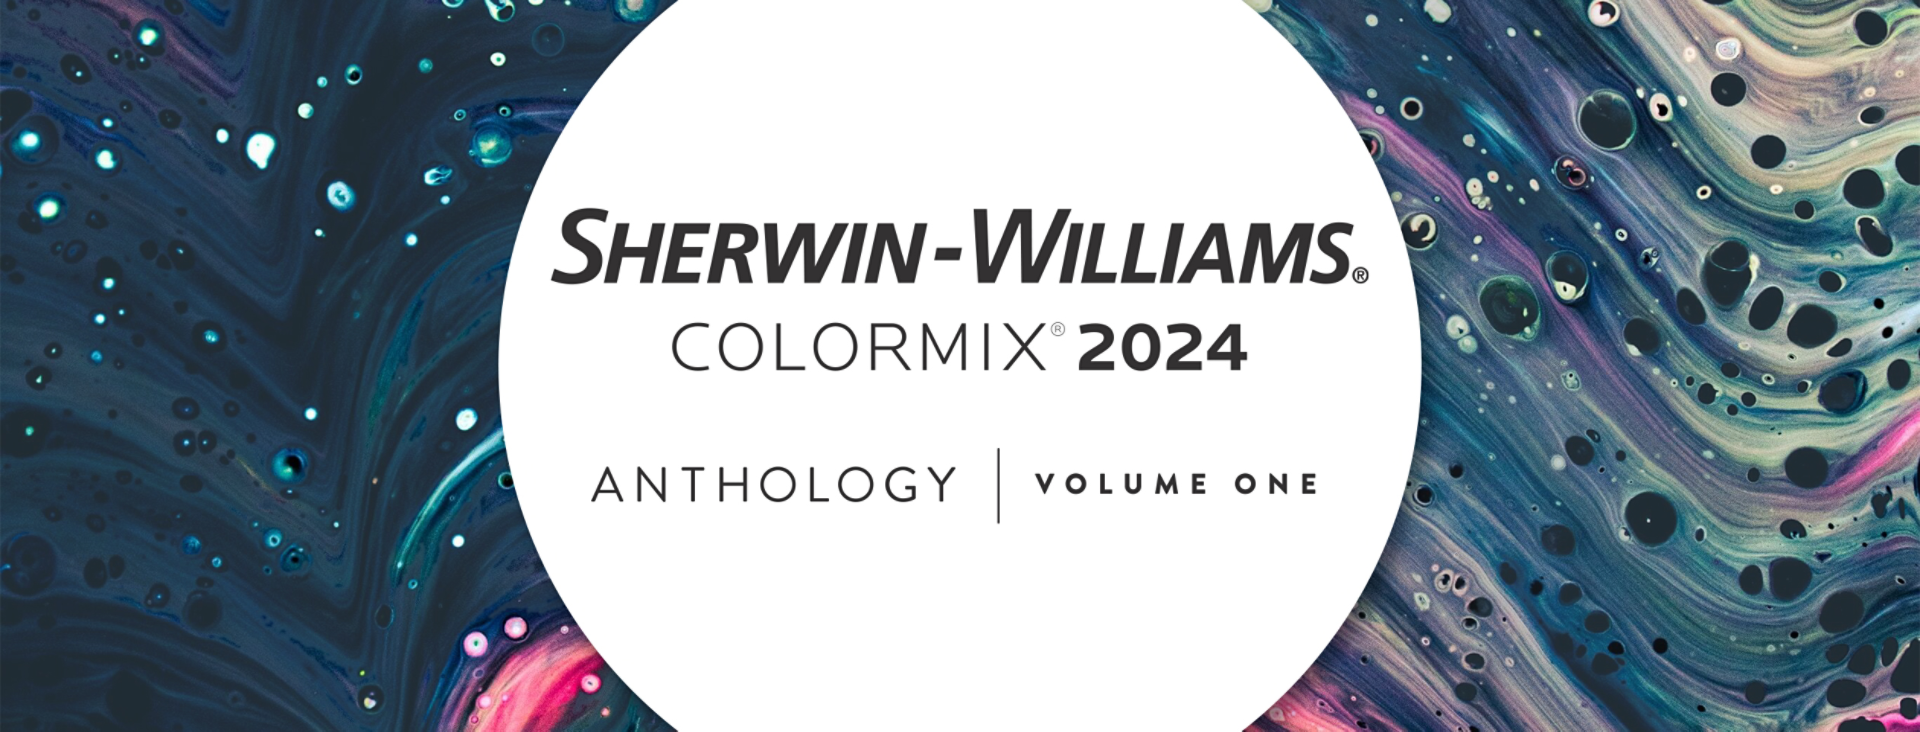 Sherwin-Williams Colormix 2024 logo for Anthology: Volume One in a white circle with a background of swirling multicolored paint.